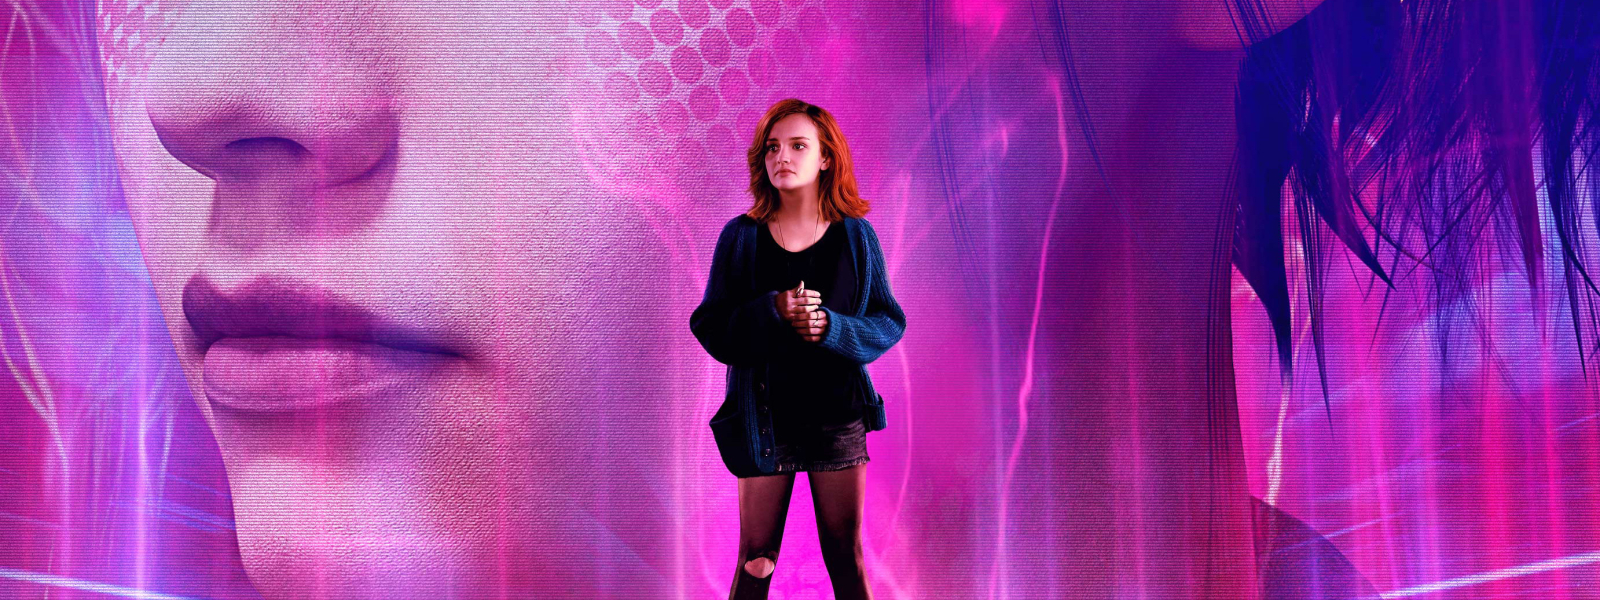 1600x600 Olivia Cooke As Art3mis Ready Player One 1600x600 Resolution ...